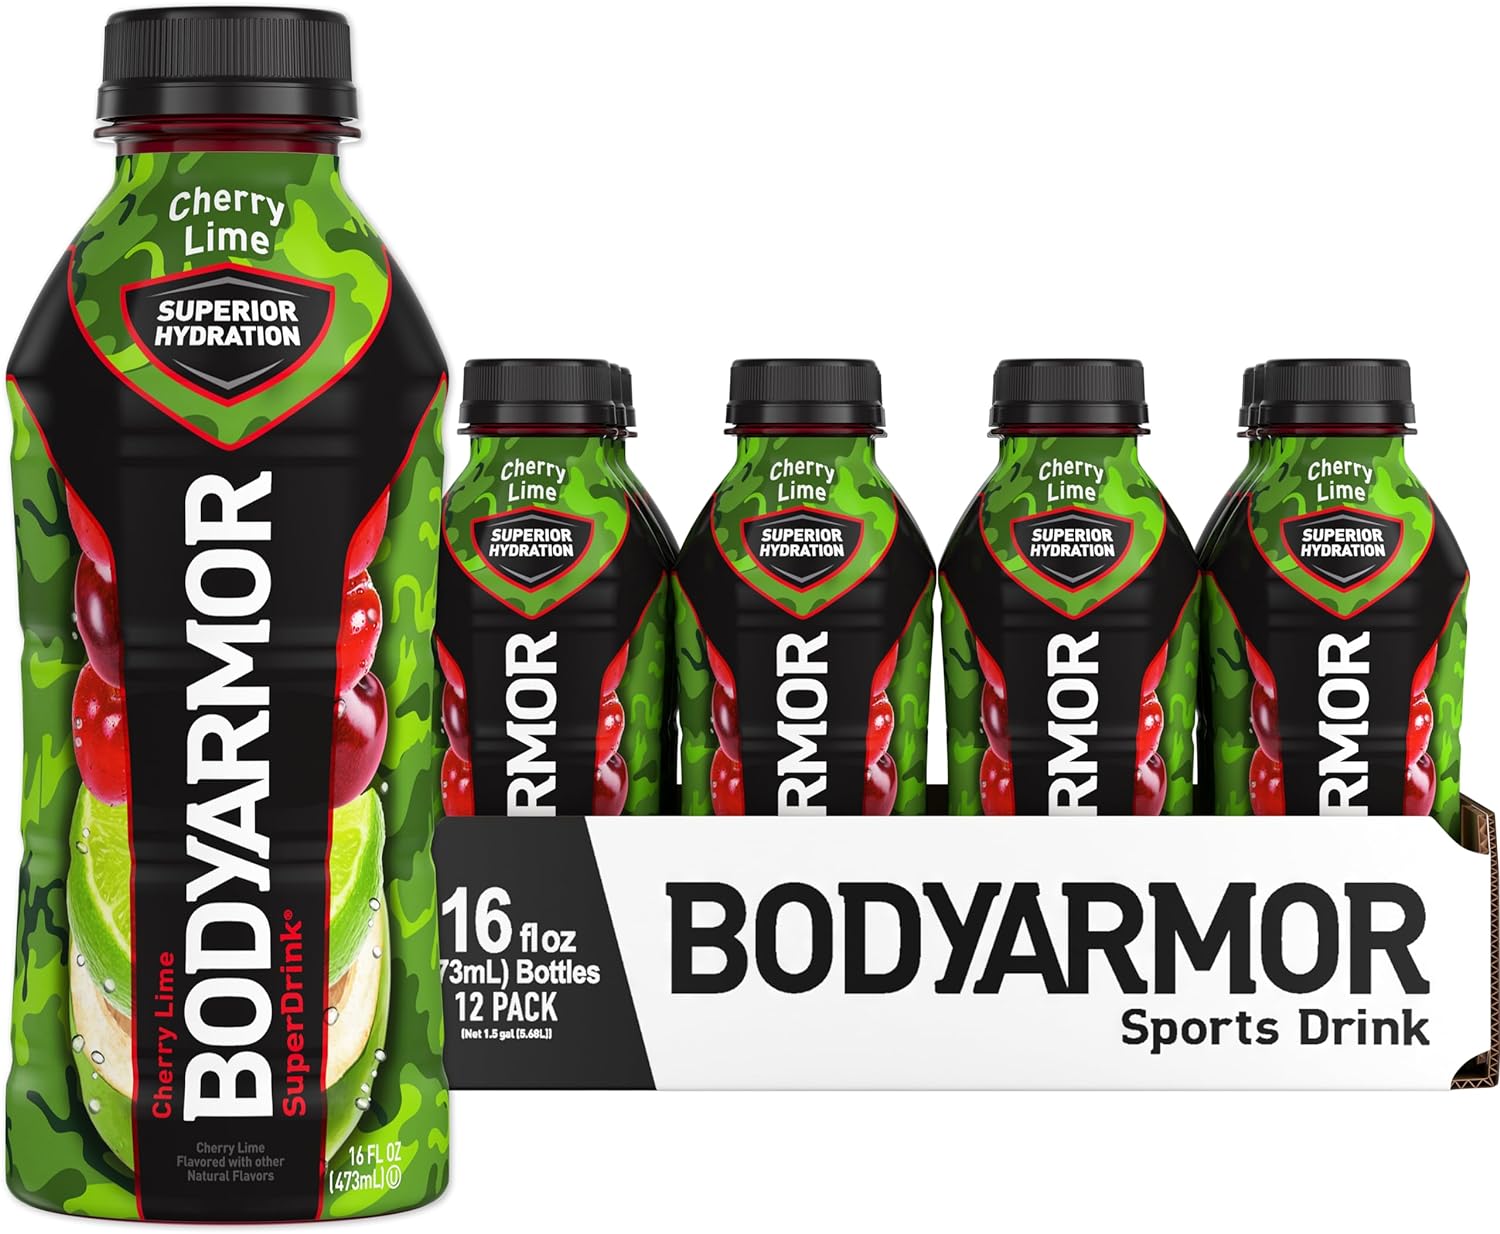 12-Pack 16-Oz BodyArmor Sports Drink (Cherry Lime) $6.95 w/ S&S + Free S&H w/ Prime or $35+